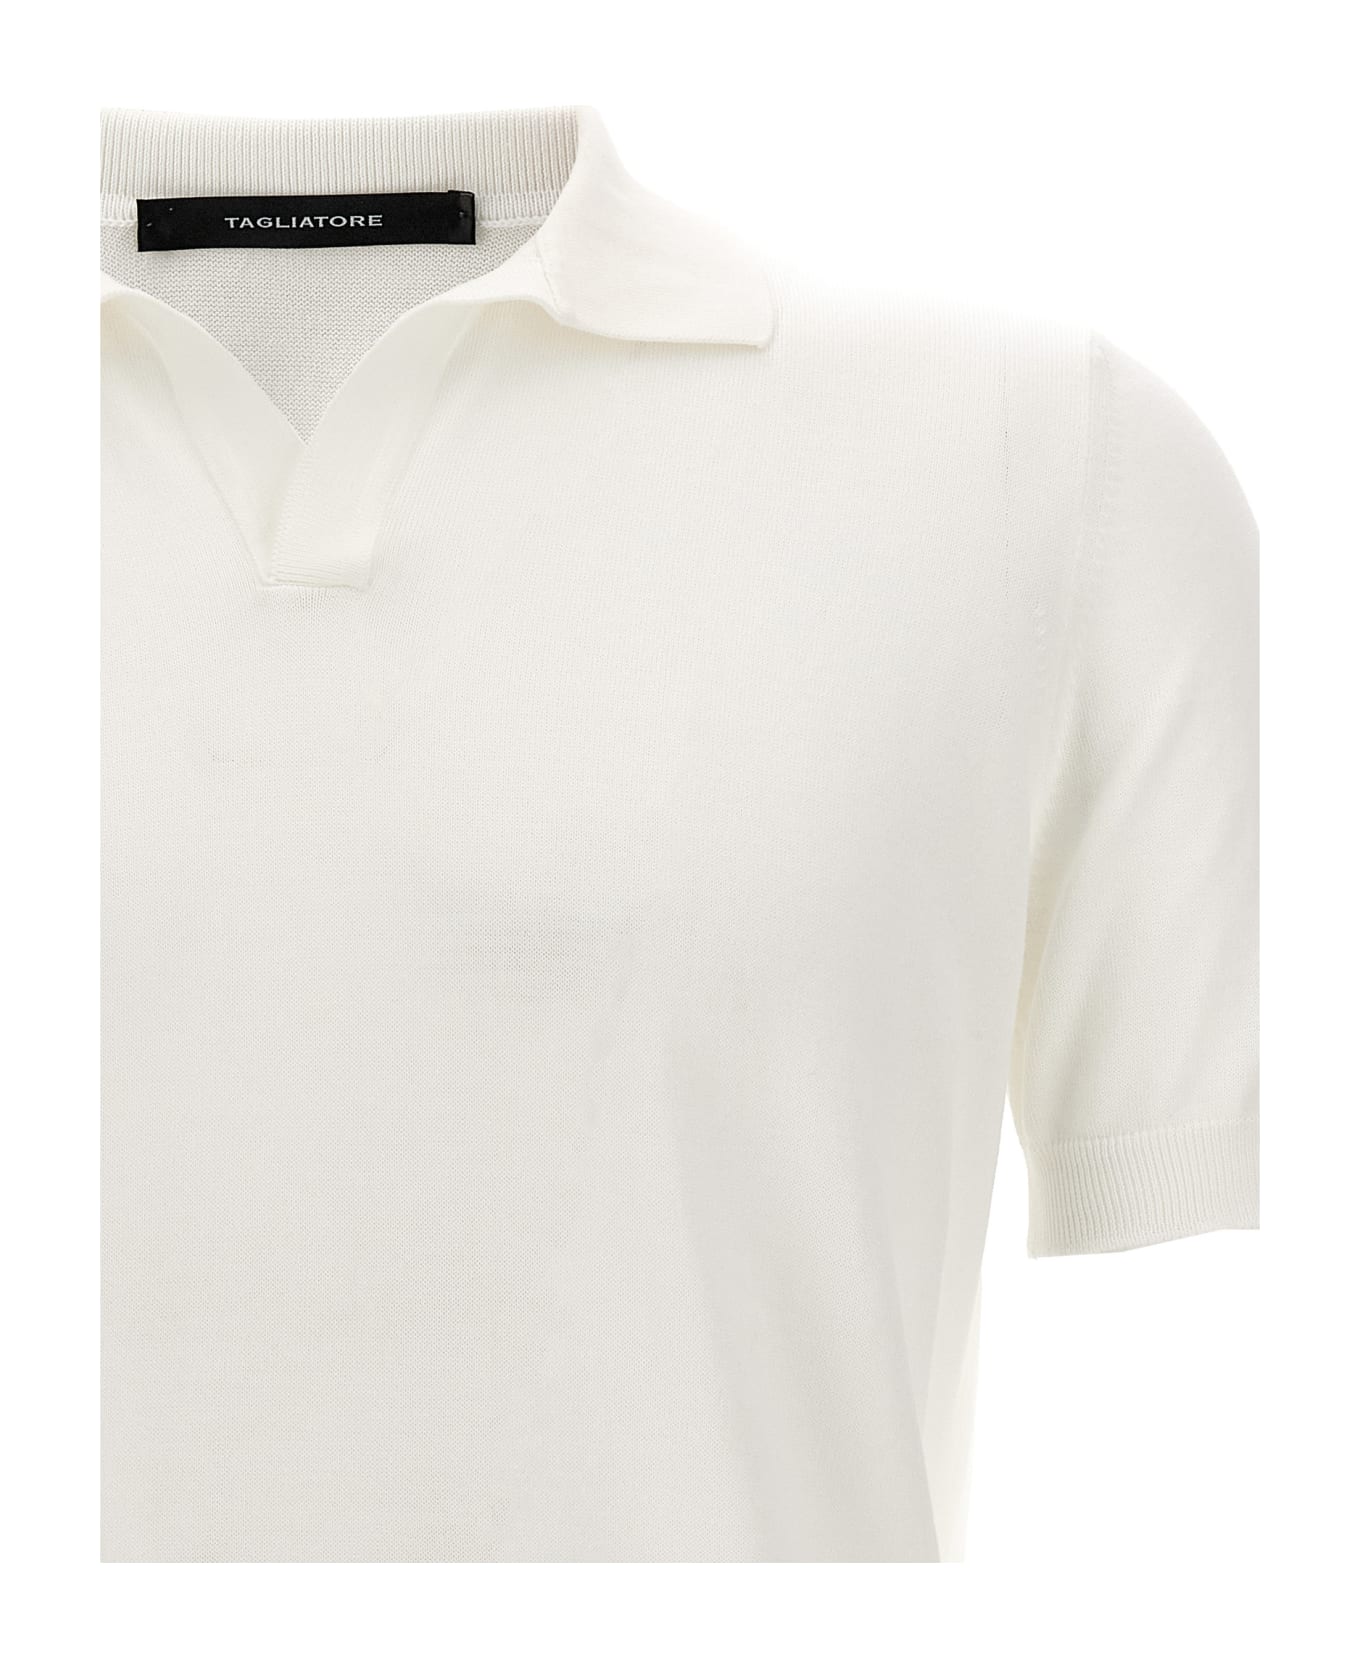 Tagliatore Knitted Polo Shirt - White ポロシャツ